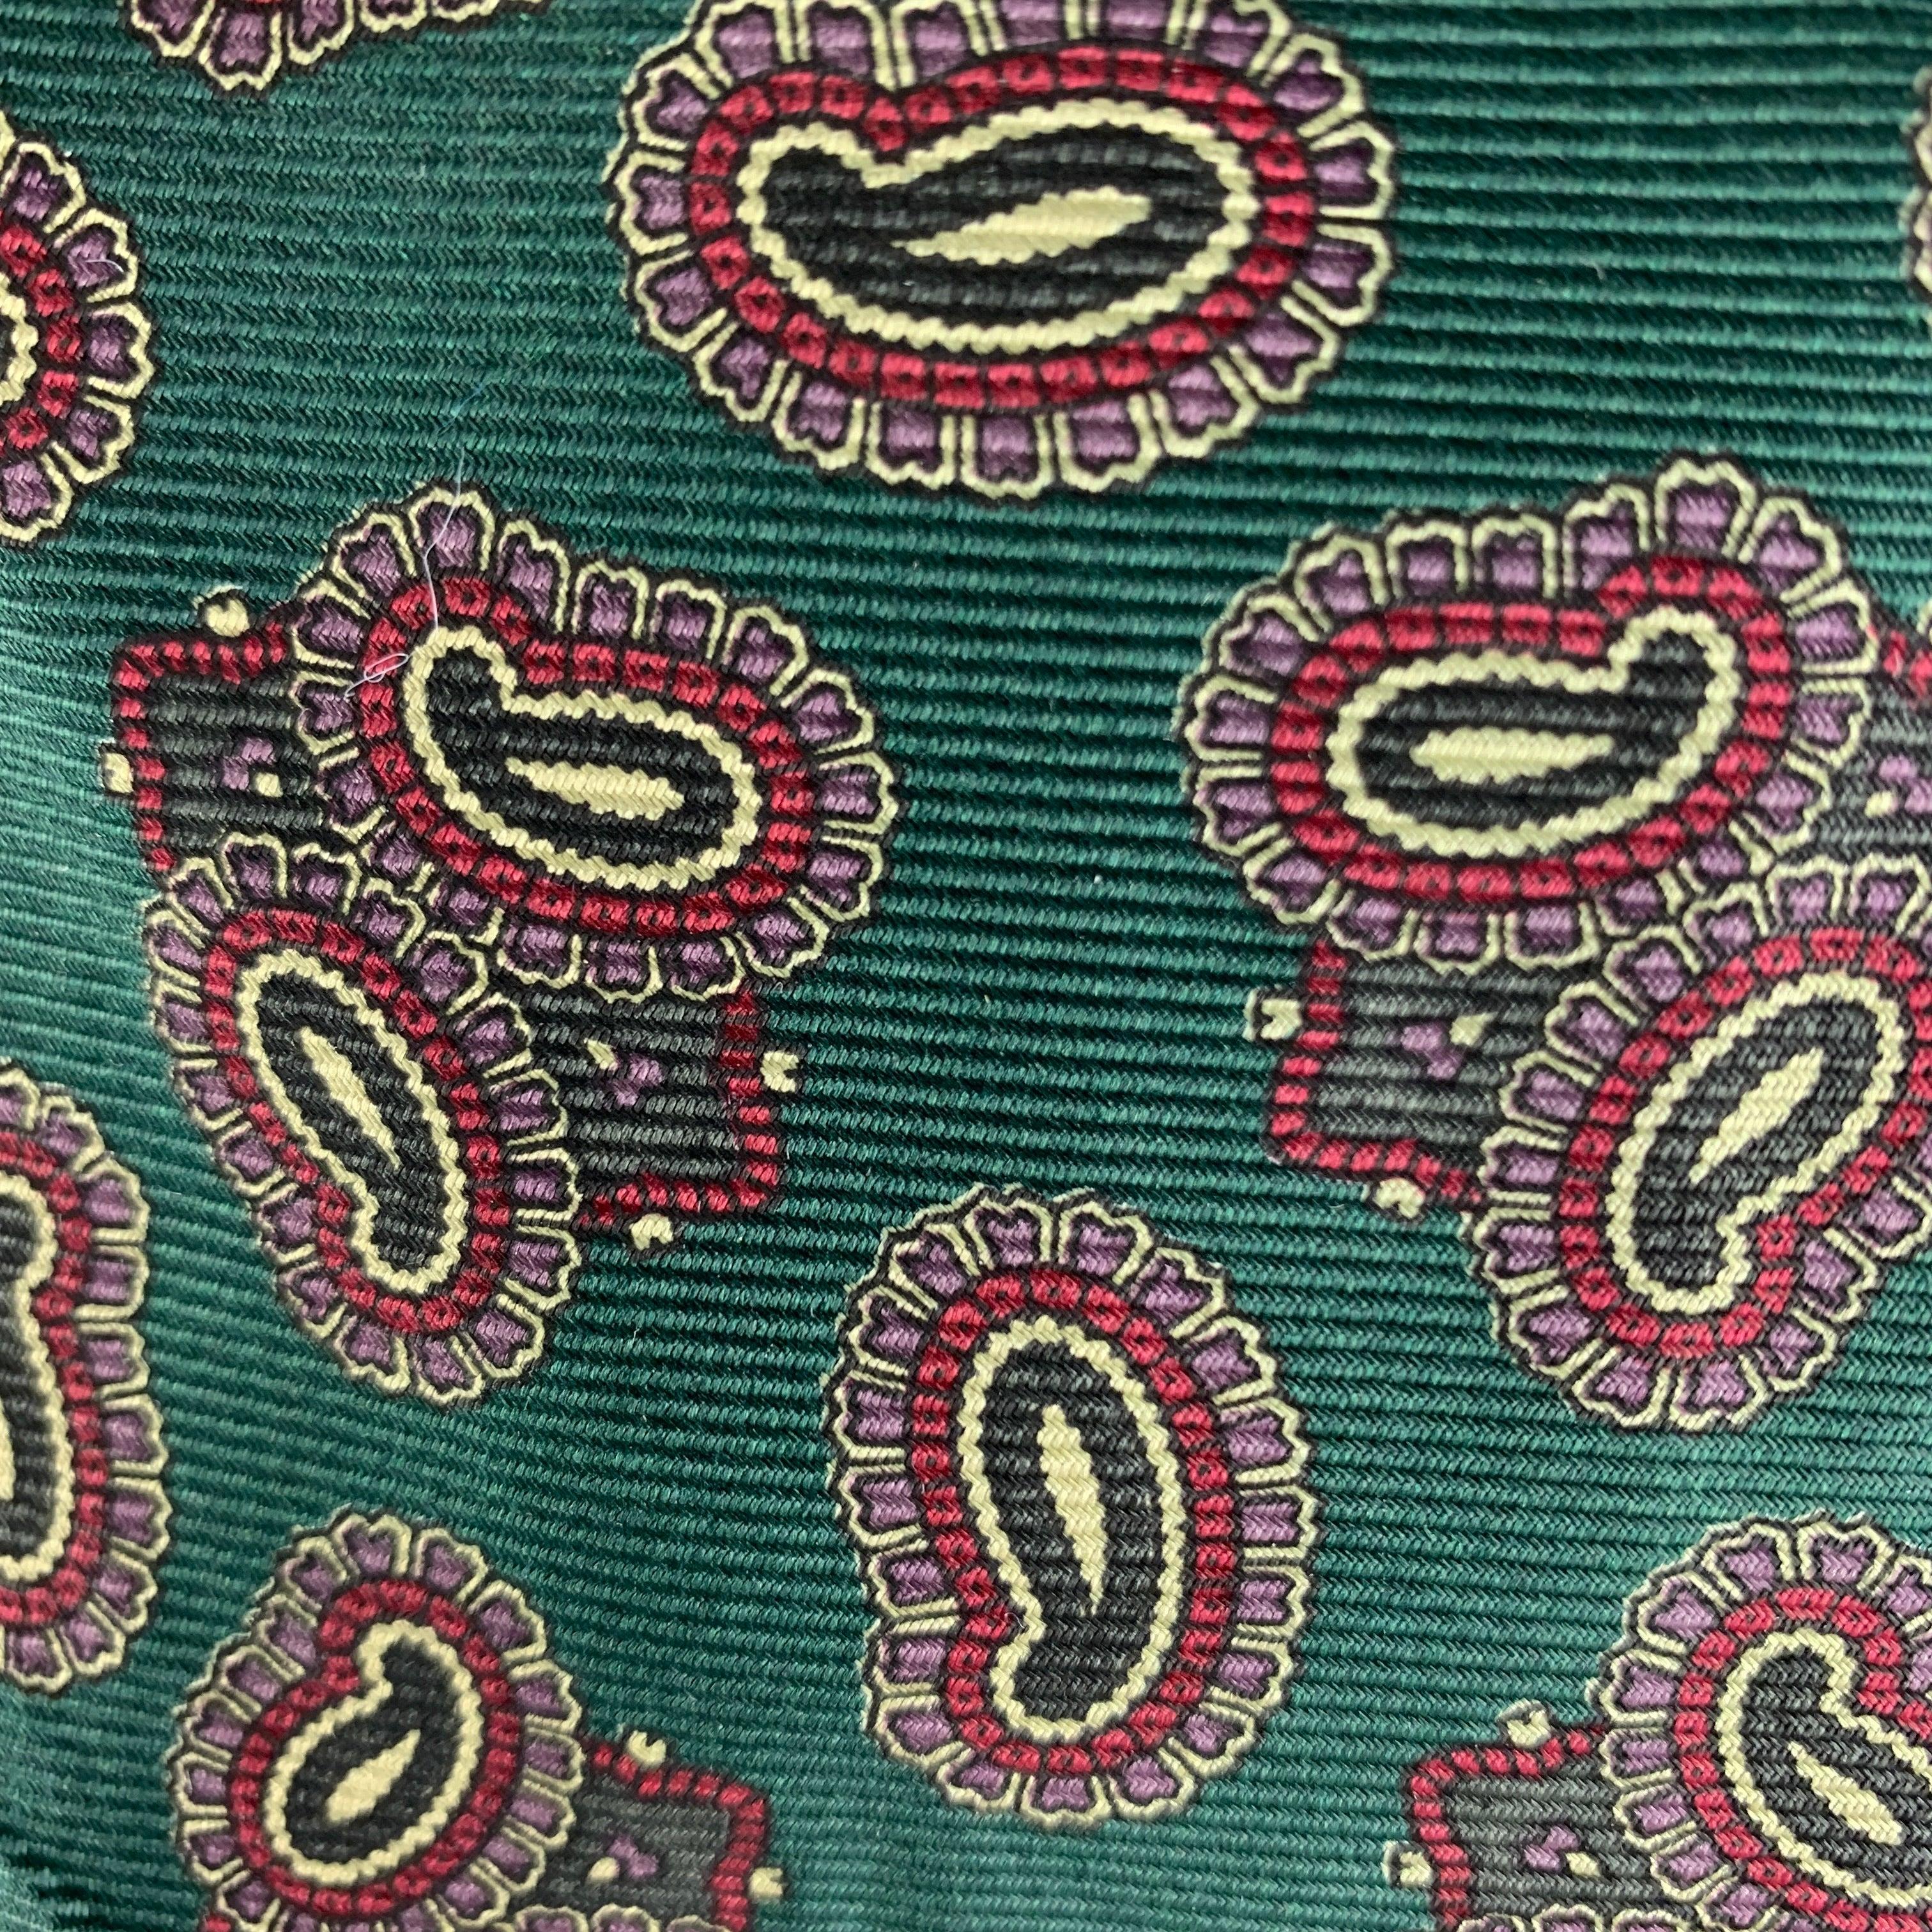 POLO by RALPH LAUREN classic necktie comes in forest green featuring a burgundy paisley design. 100% silk. Handmade in U.S.A.
Very Good Pre-Owned Condition.
 

Measurements: 
  Width: 3 inches Length: 55 inches 



  
  
 
Reference: